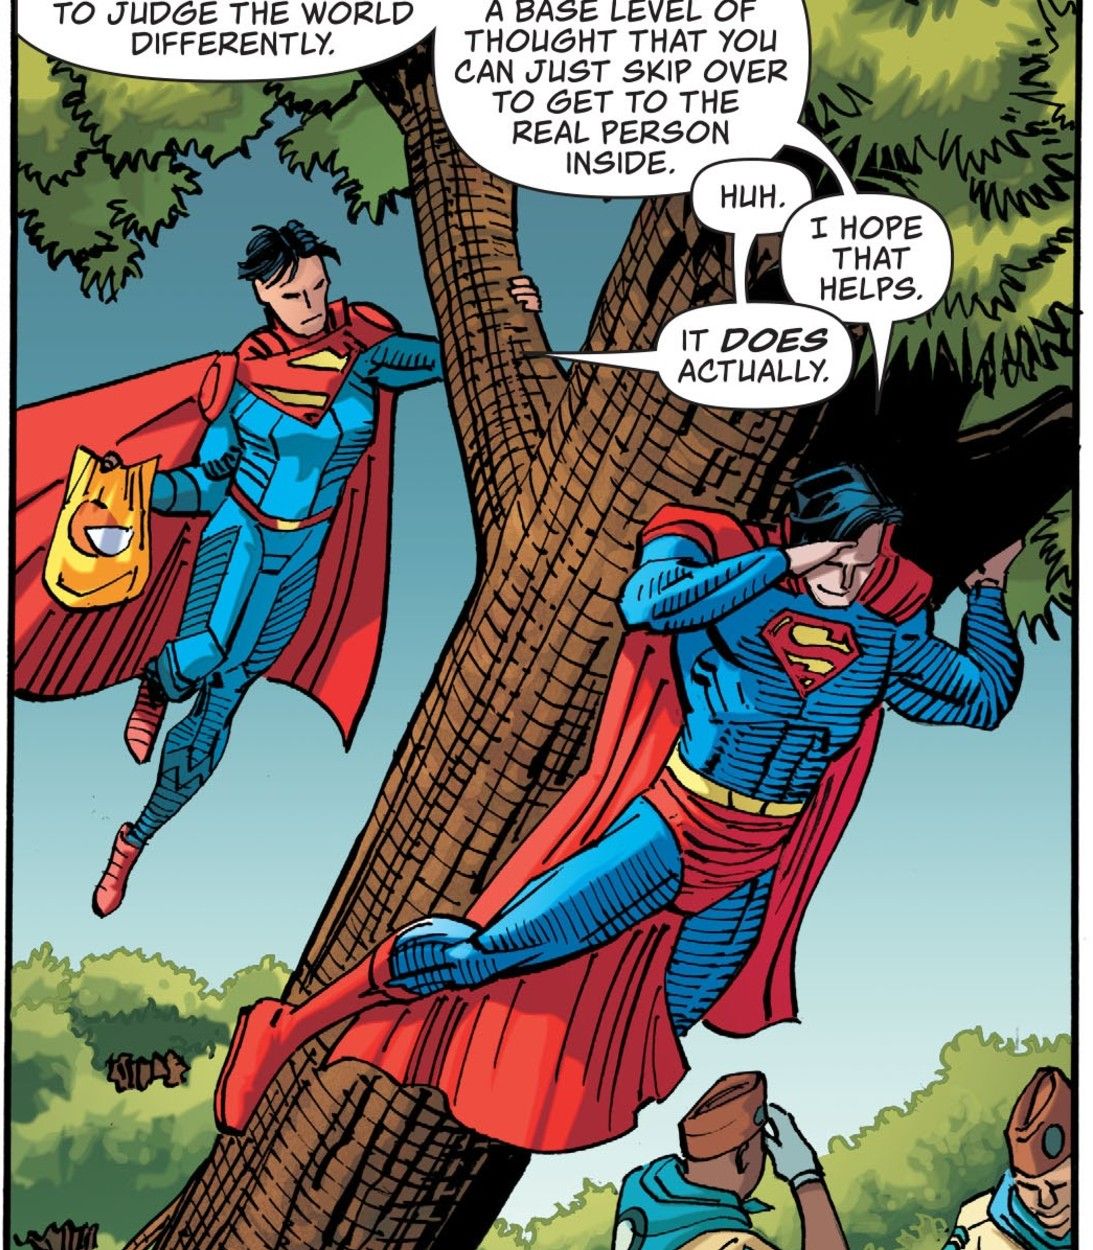 Superman and Superboy liftiing a tree in Action Comics #1028.